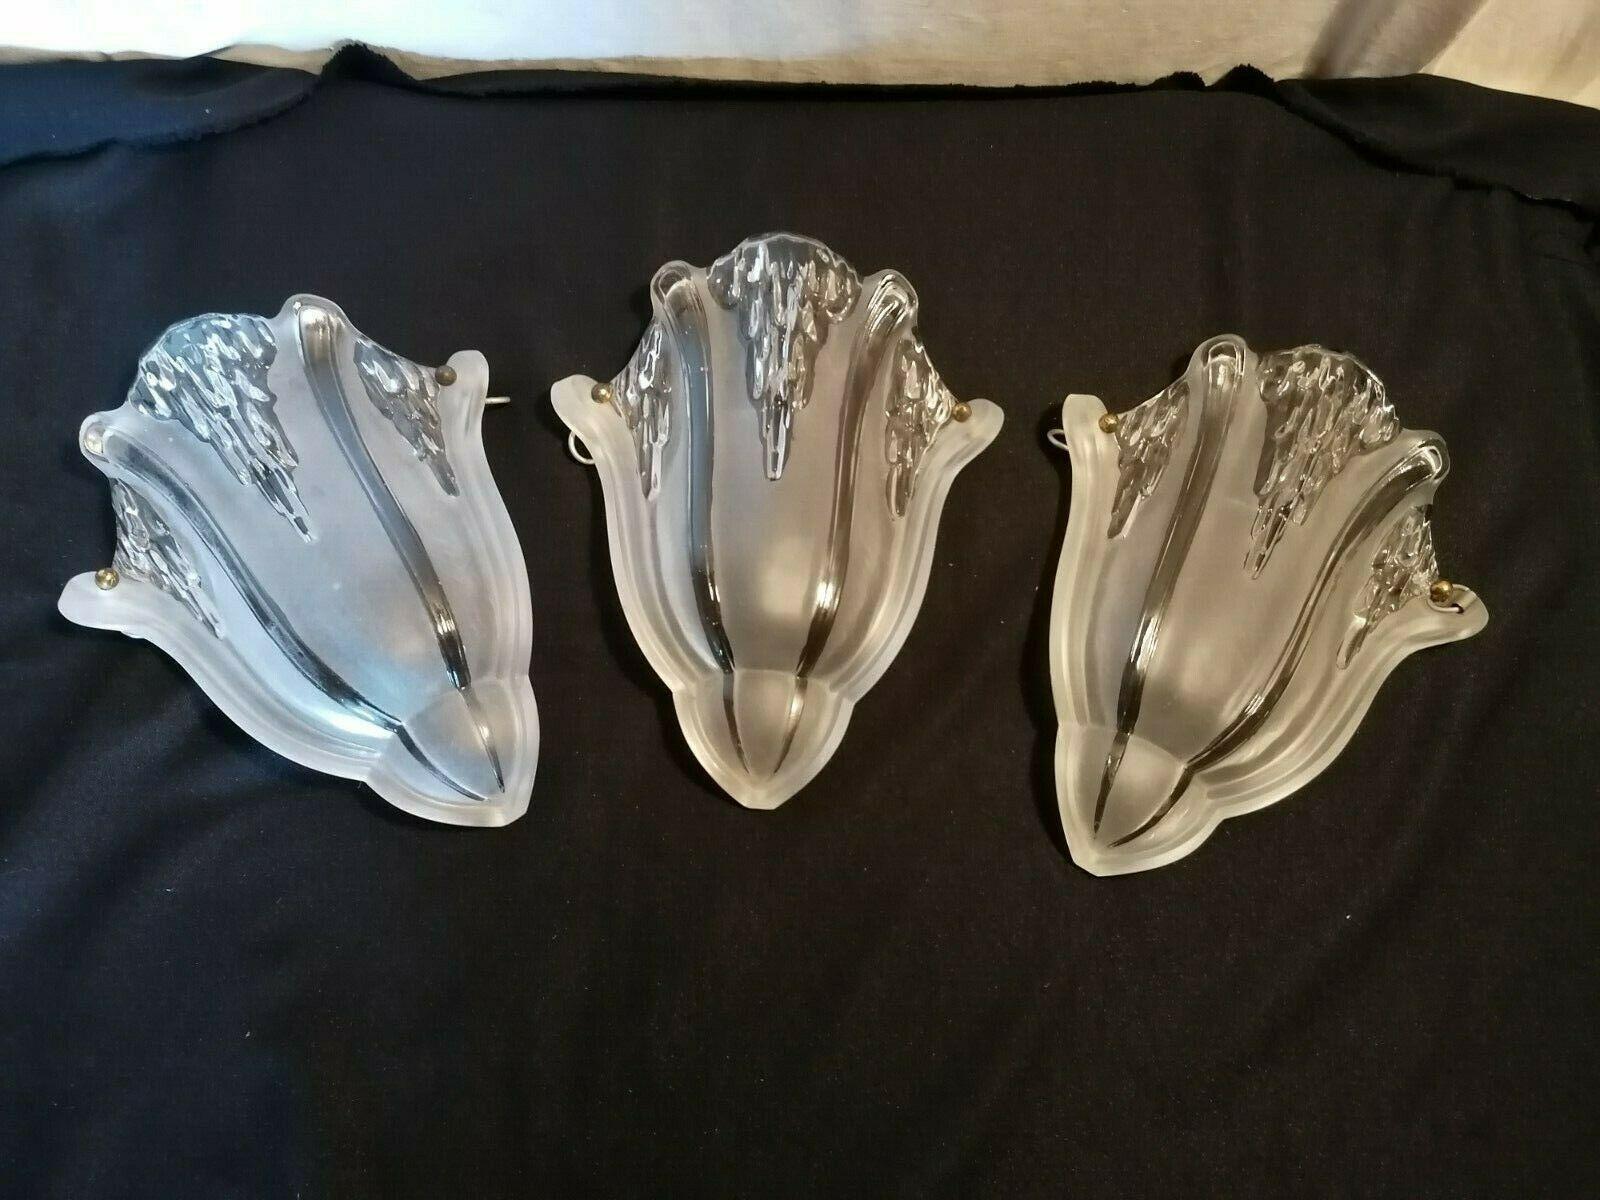 Spectacular Set of  3 Signed Ezan Wall Sconce Shades. These are 